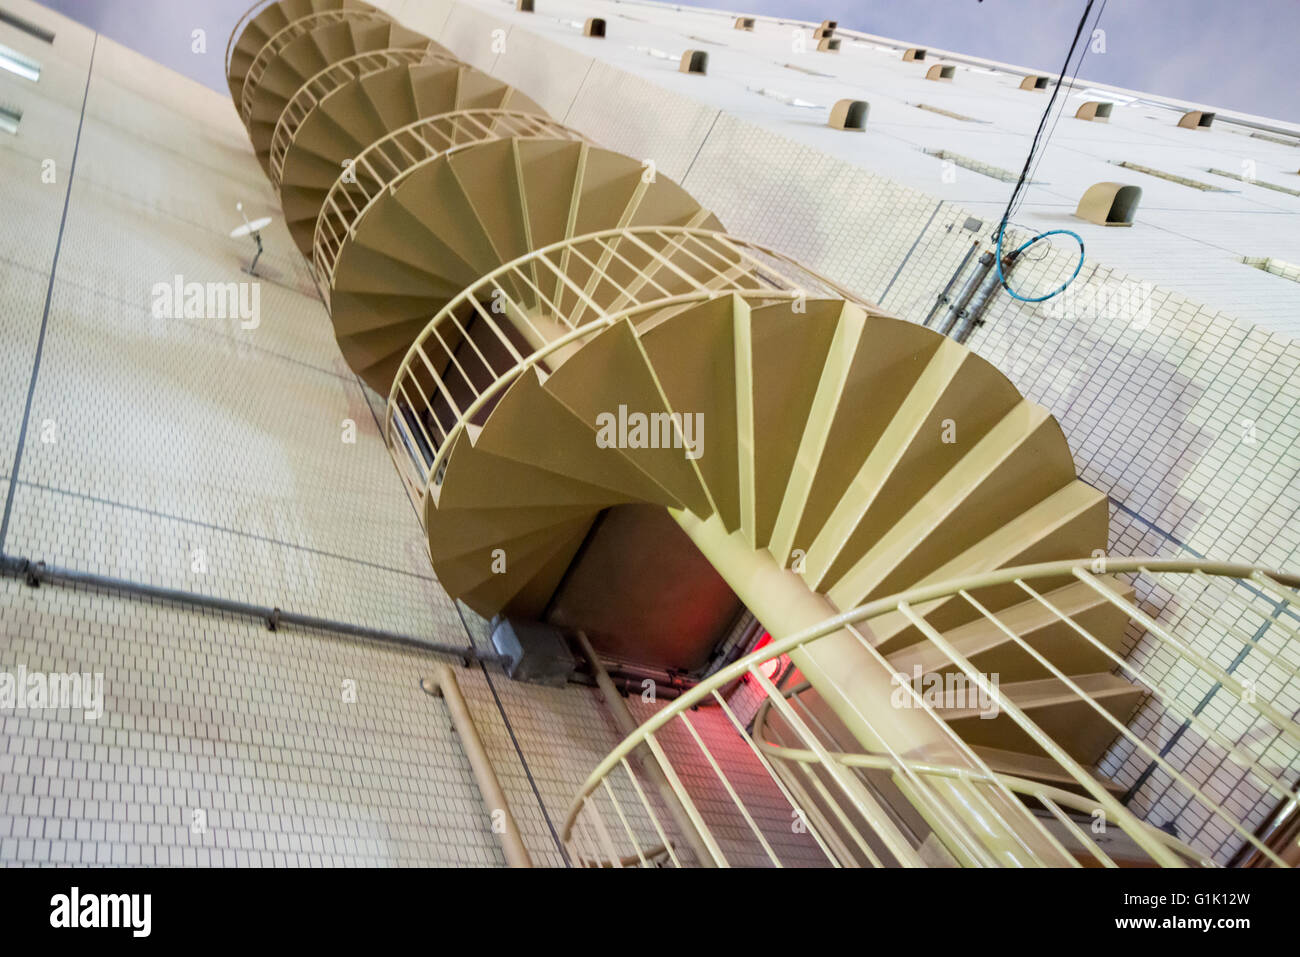 Spiraling metal staircase on outside of building Stock Photo